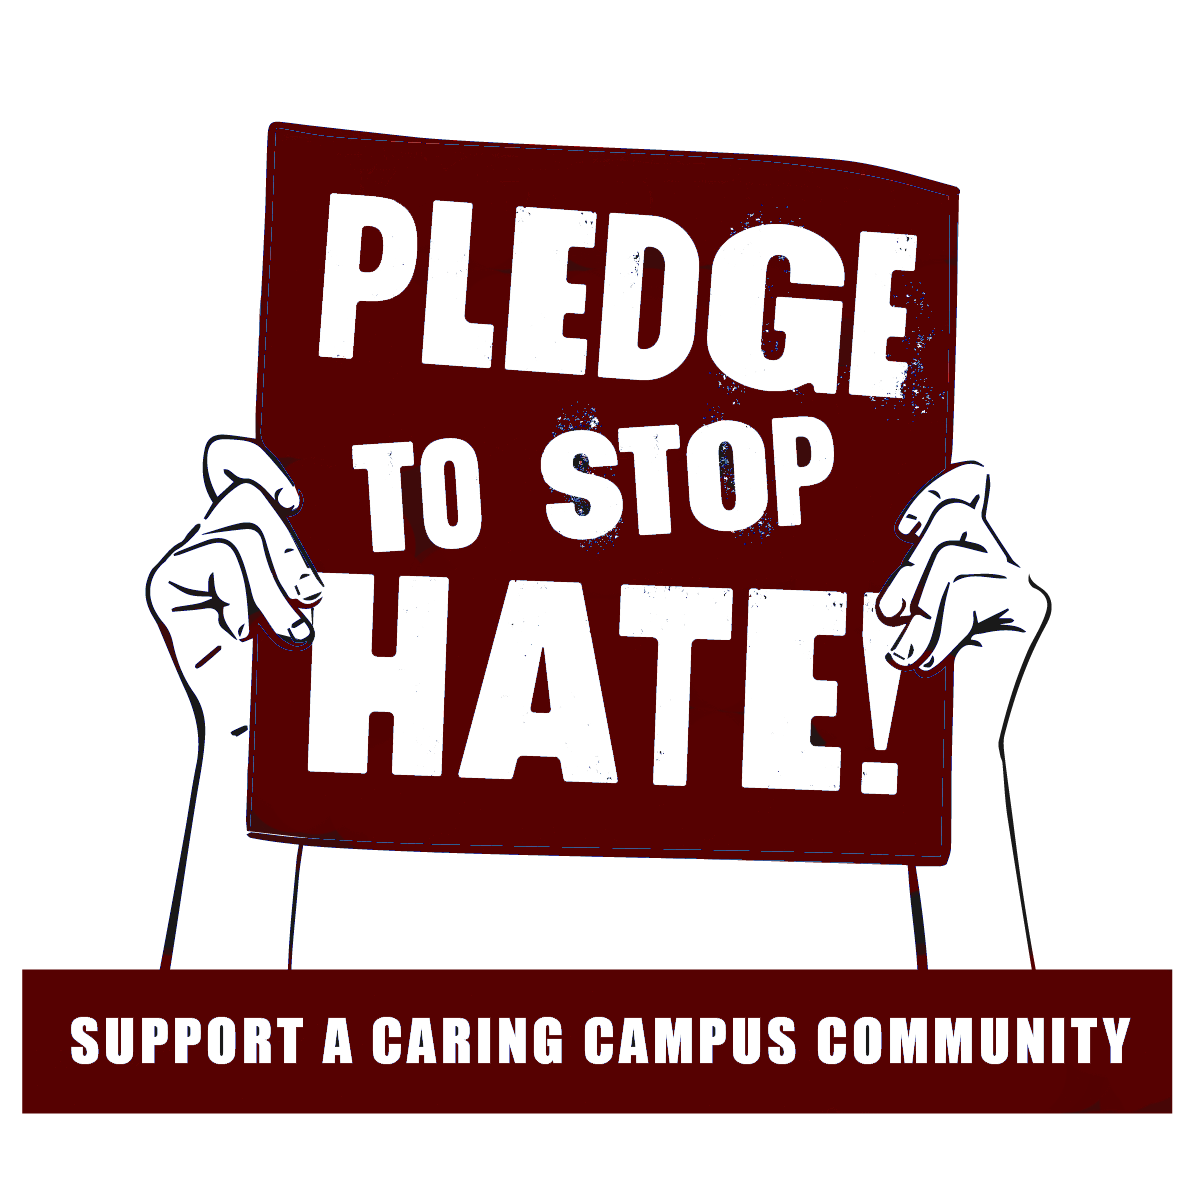 Pledge To Stop Hate!